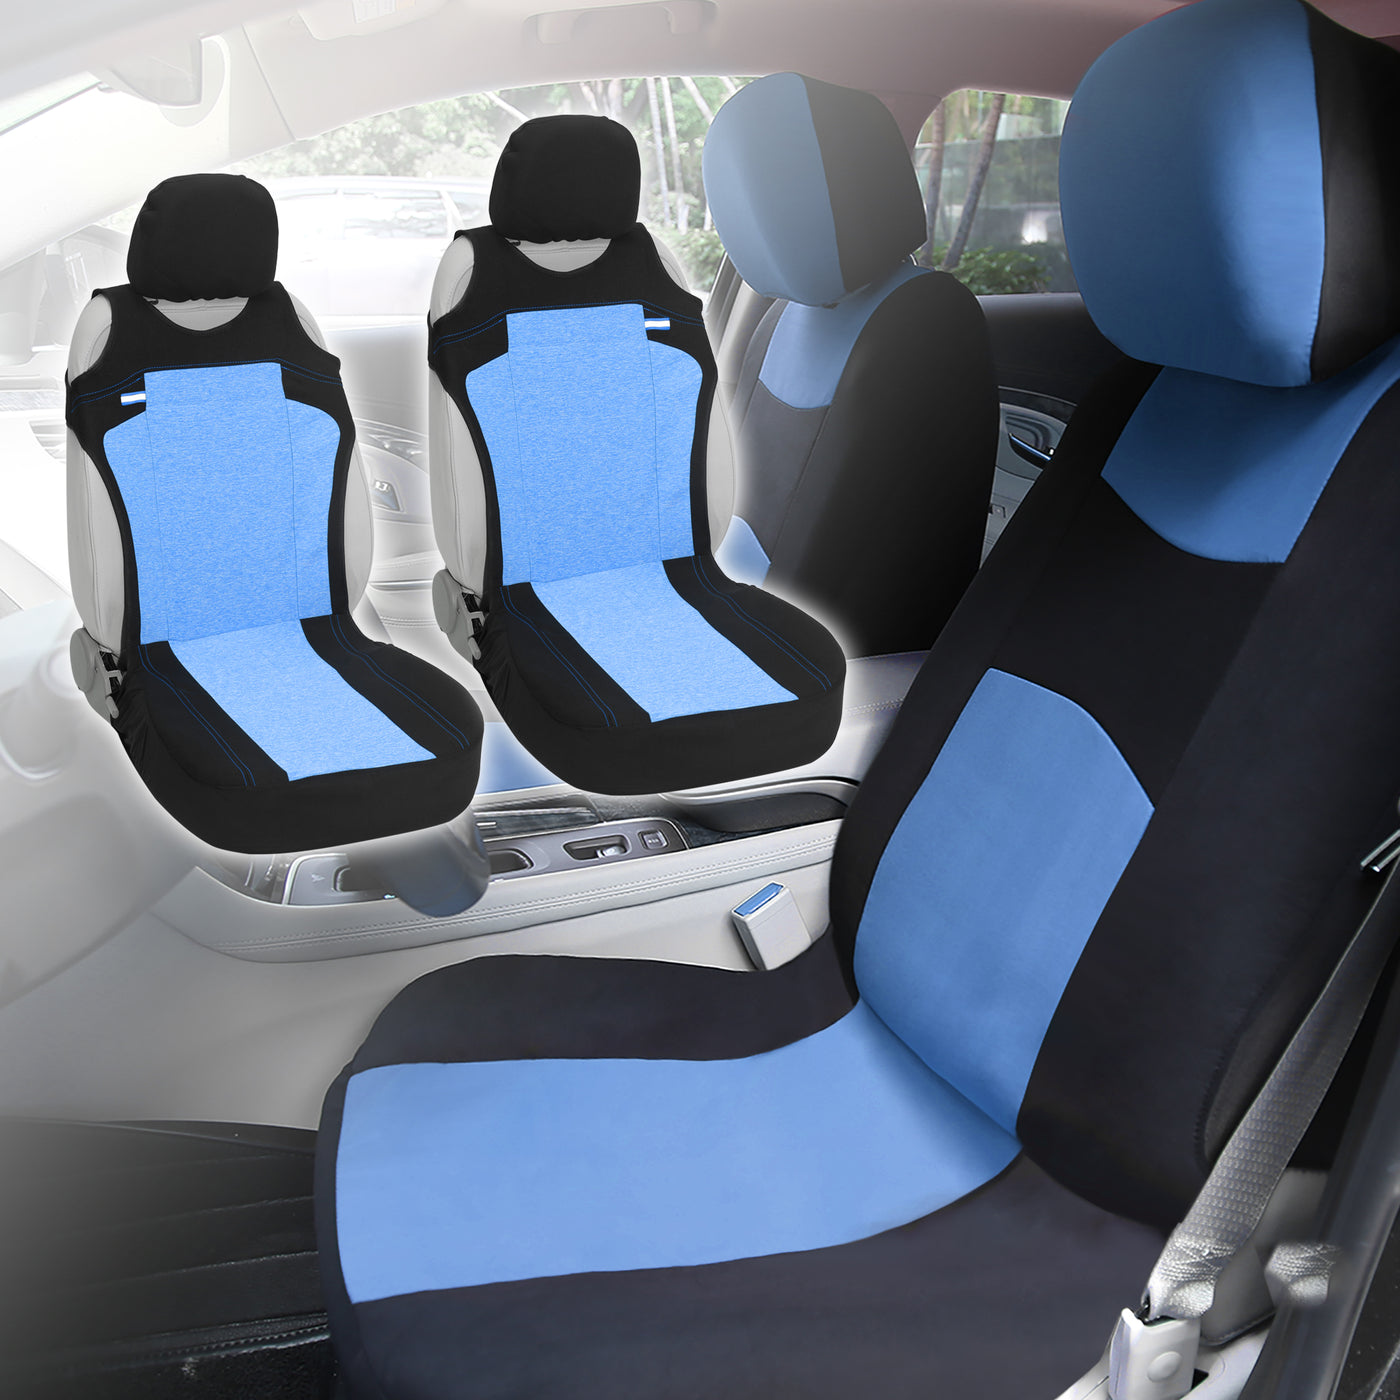 X AUTOHAUX Universal Front Car Seat Cover Kit Cloth Fabric Seat Protector Pad Fit for Car Truck SUV Blue